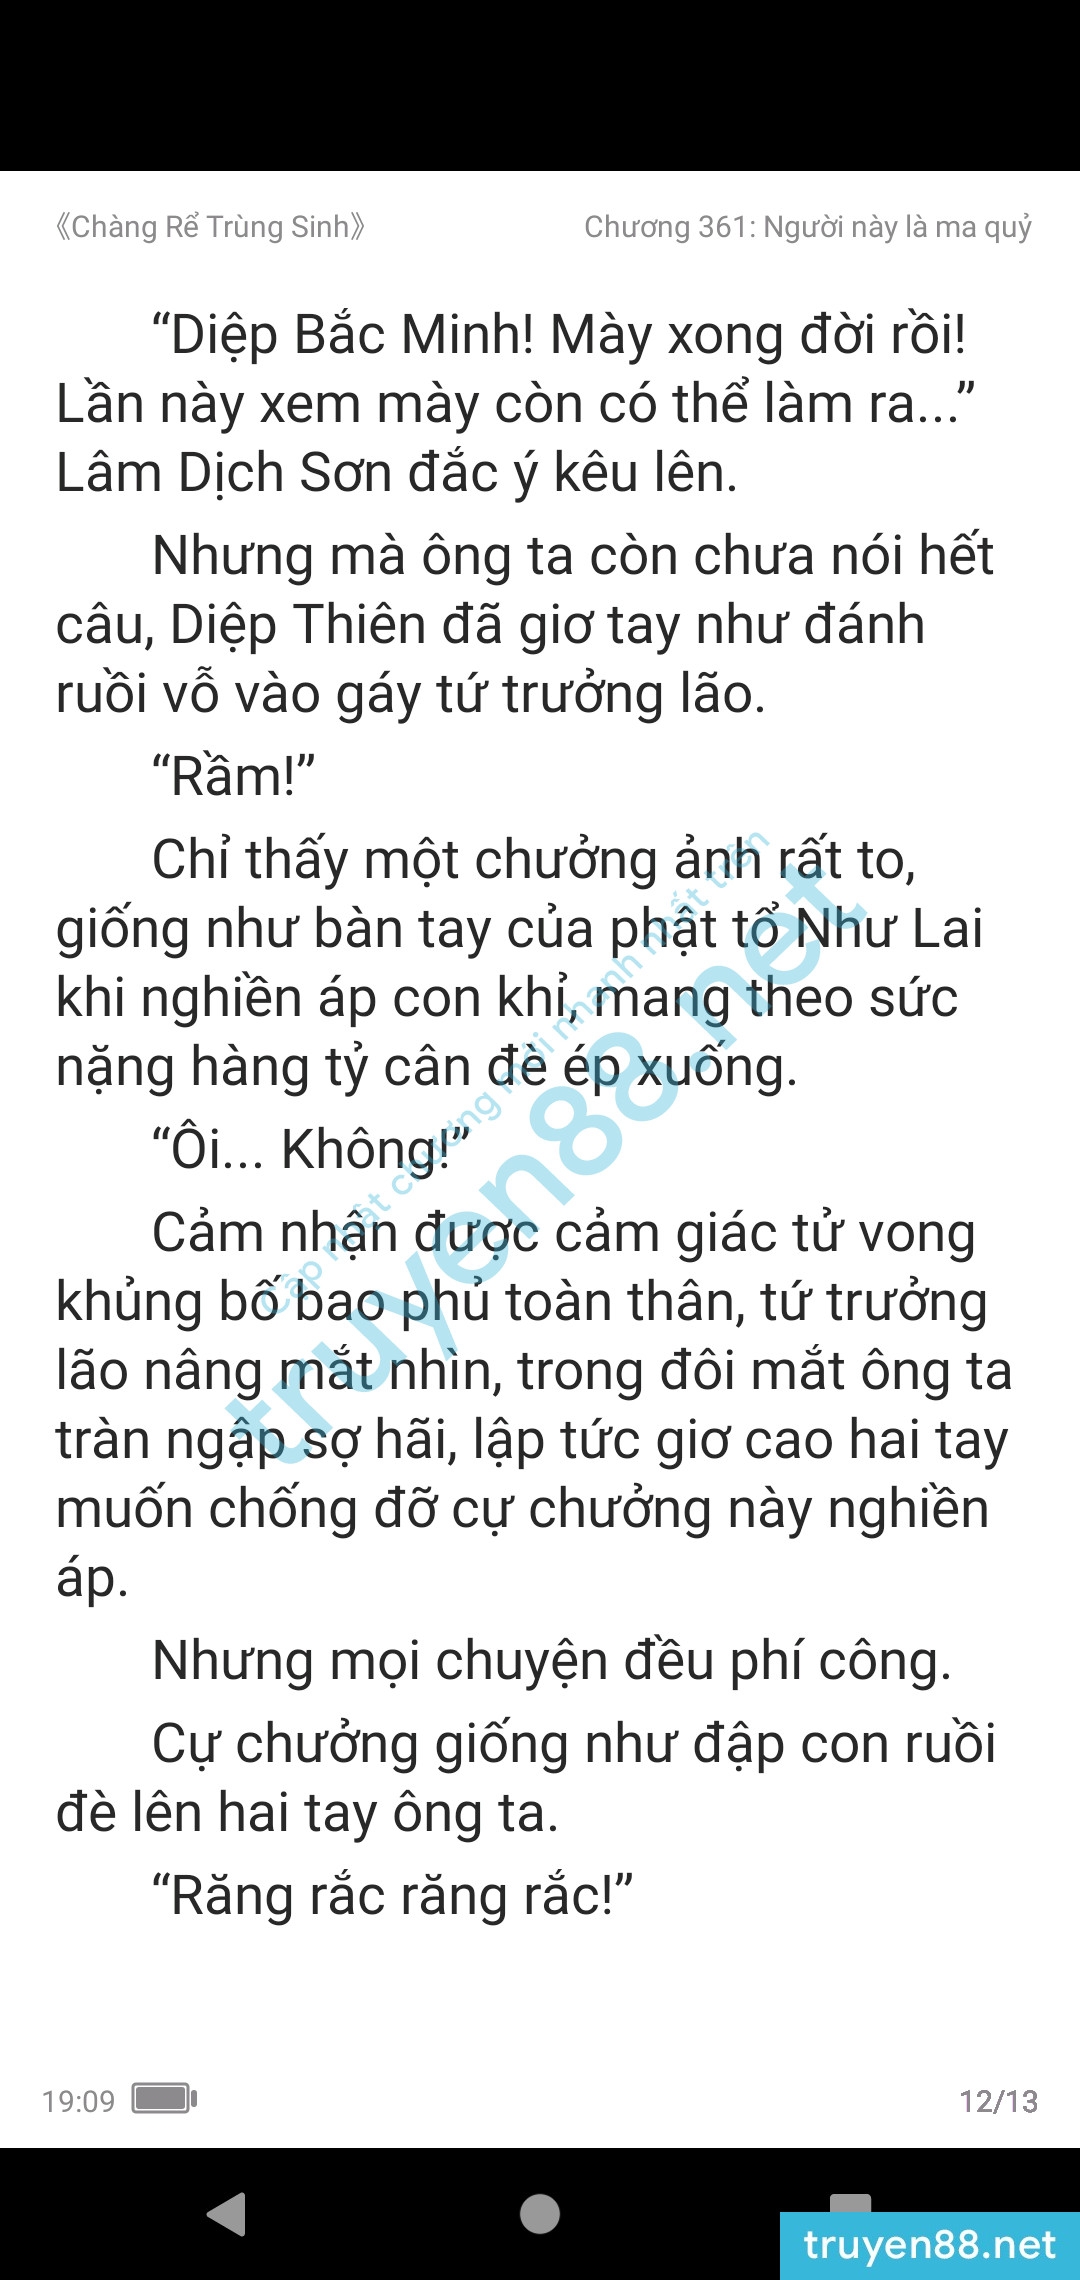 chang-re-trung-sinh-361-1